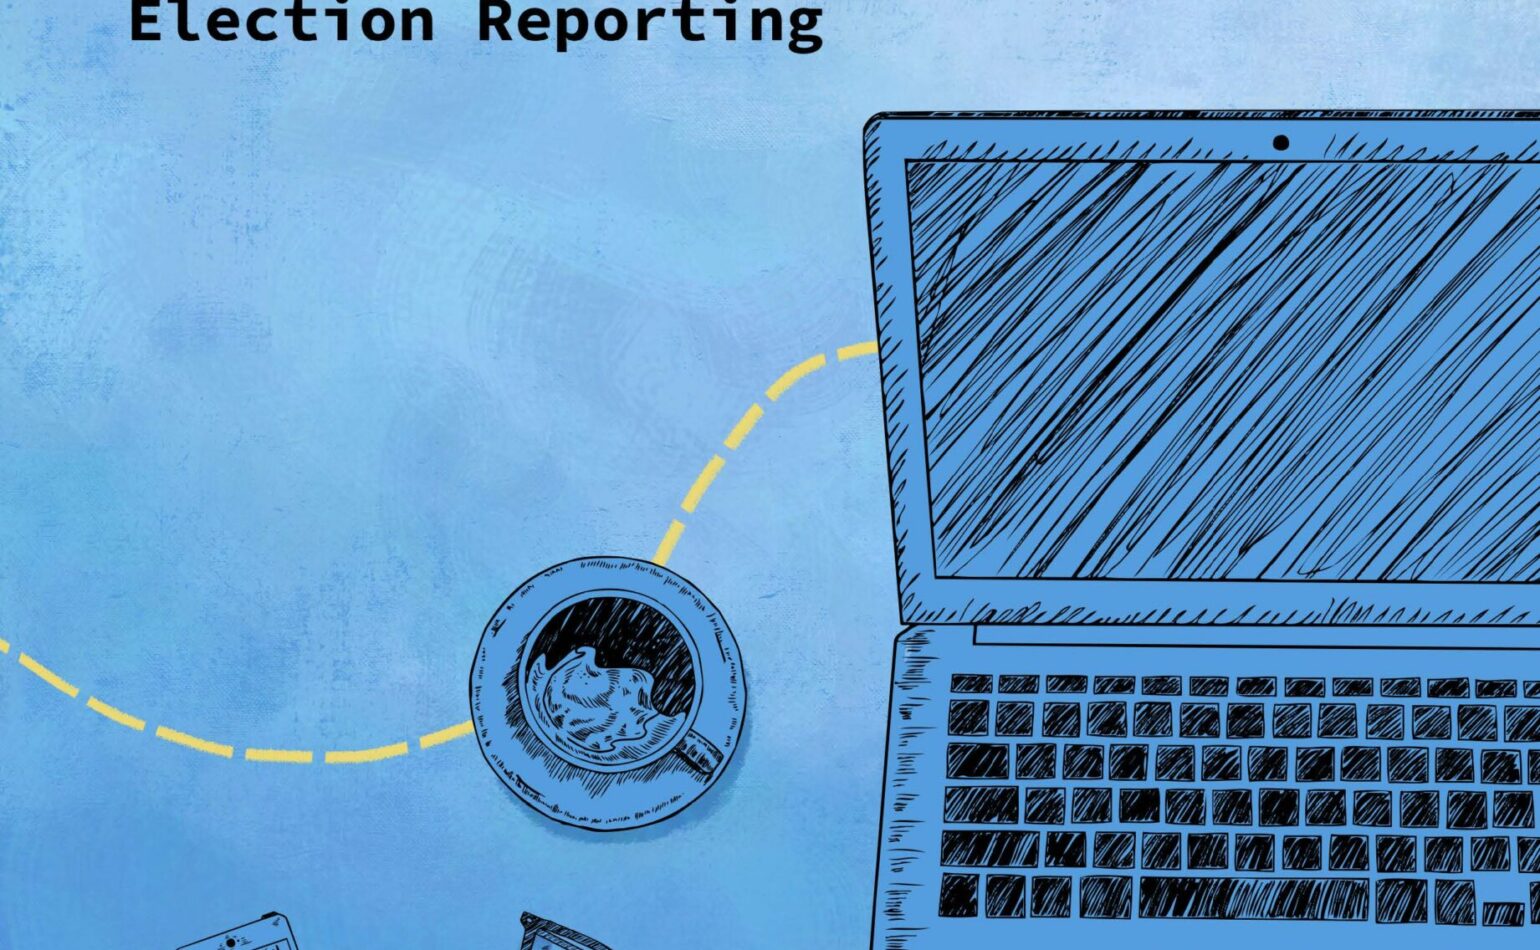 Resource Pack: Journalists’ Guide to Ethical Election Reporting